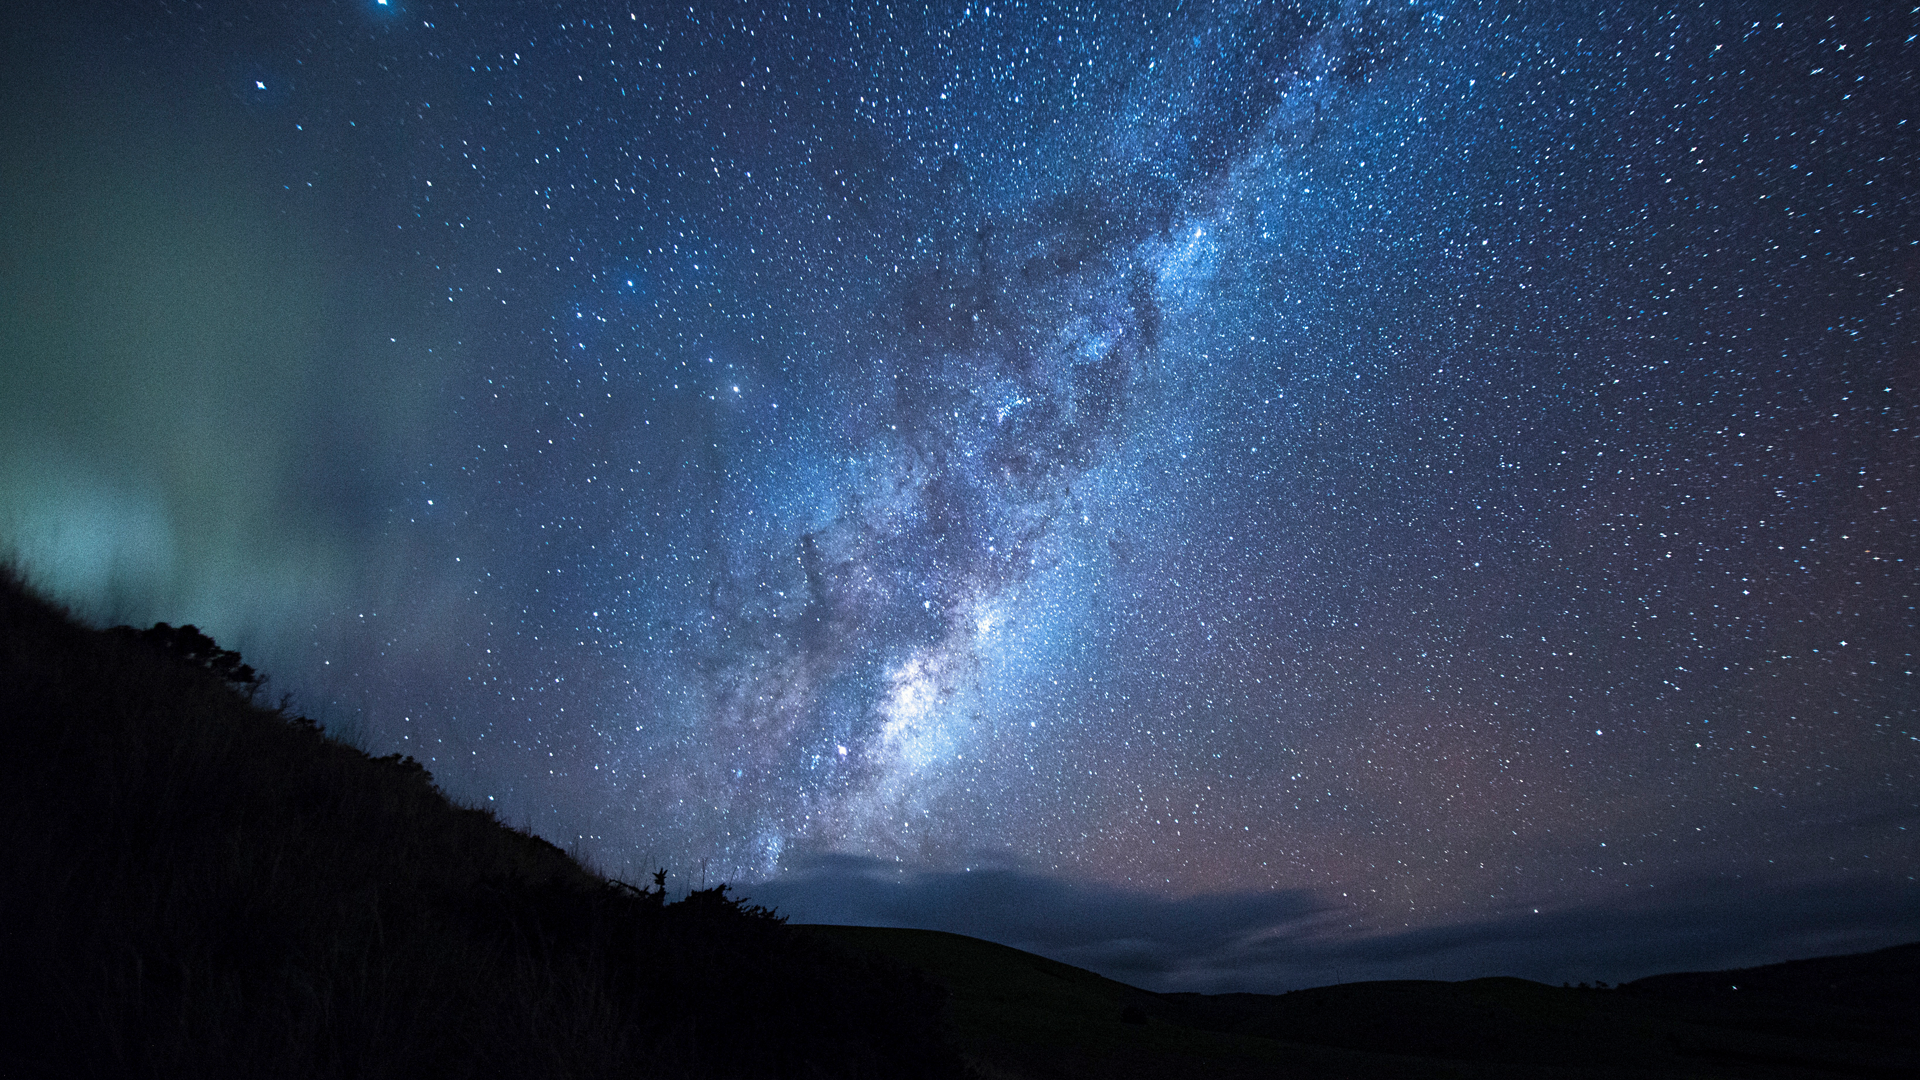 Milky Way seen from hilly landscape | Windows Spotlight Images